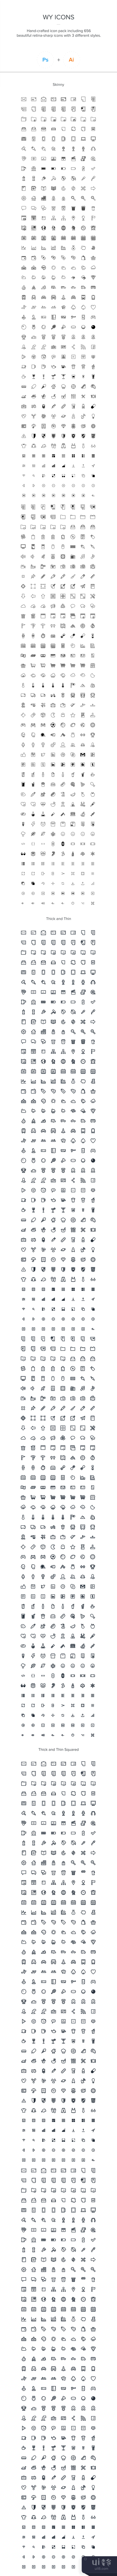 Wy图标 (Wy Icons)插图